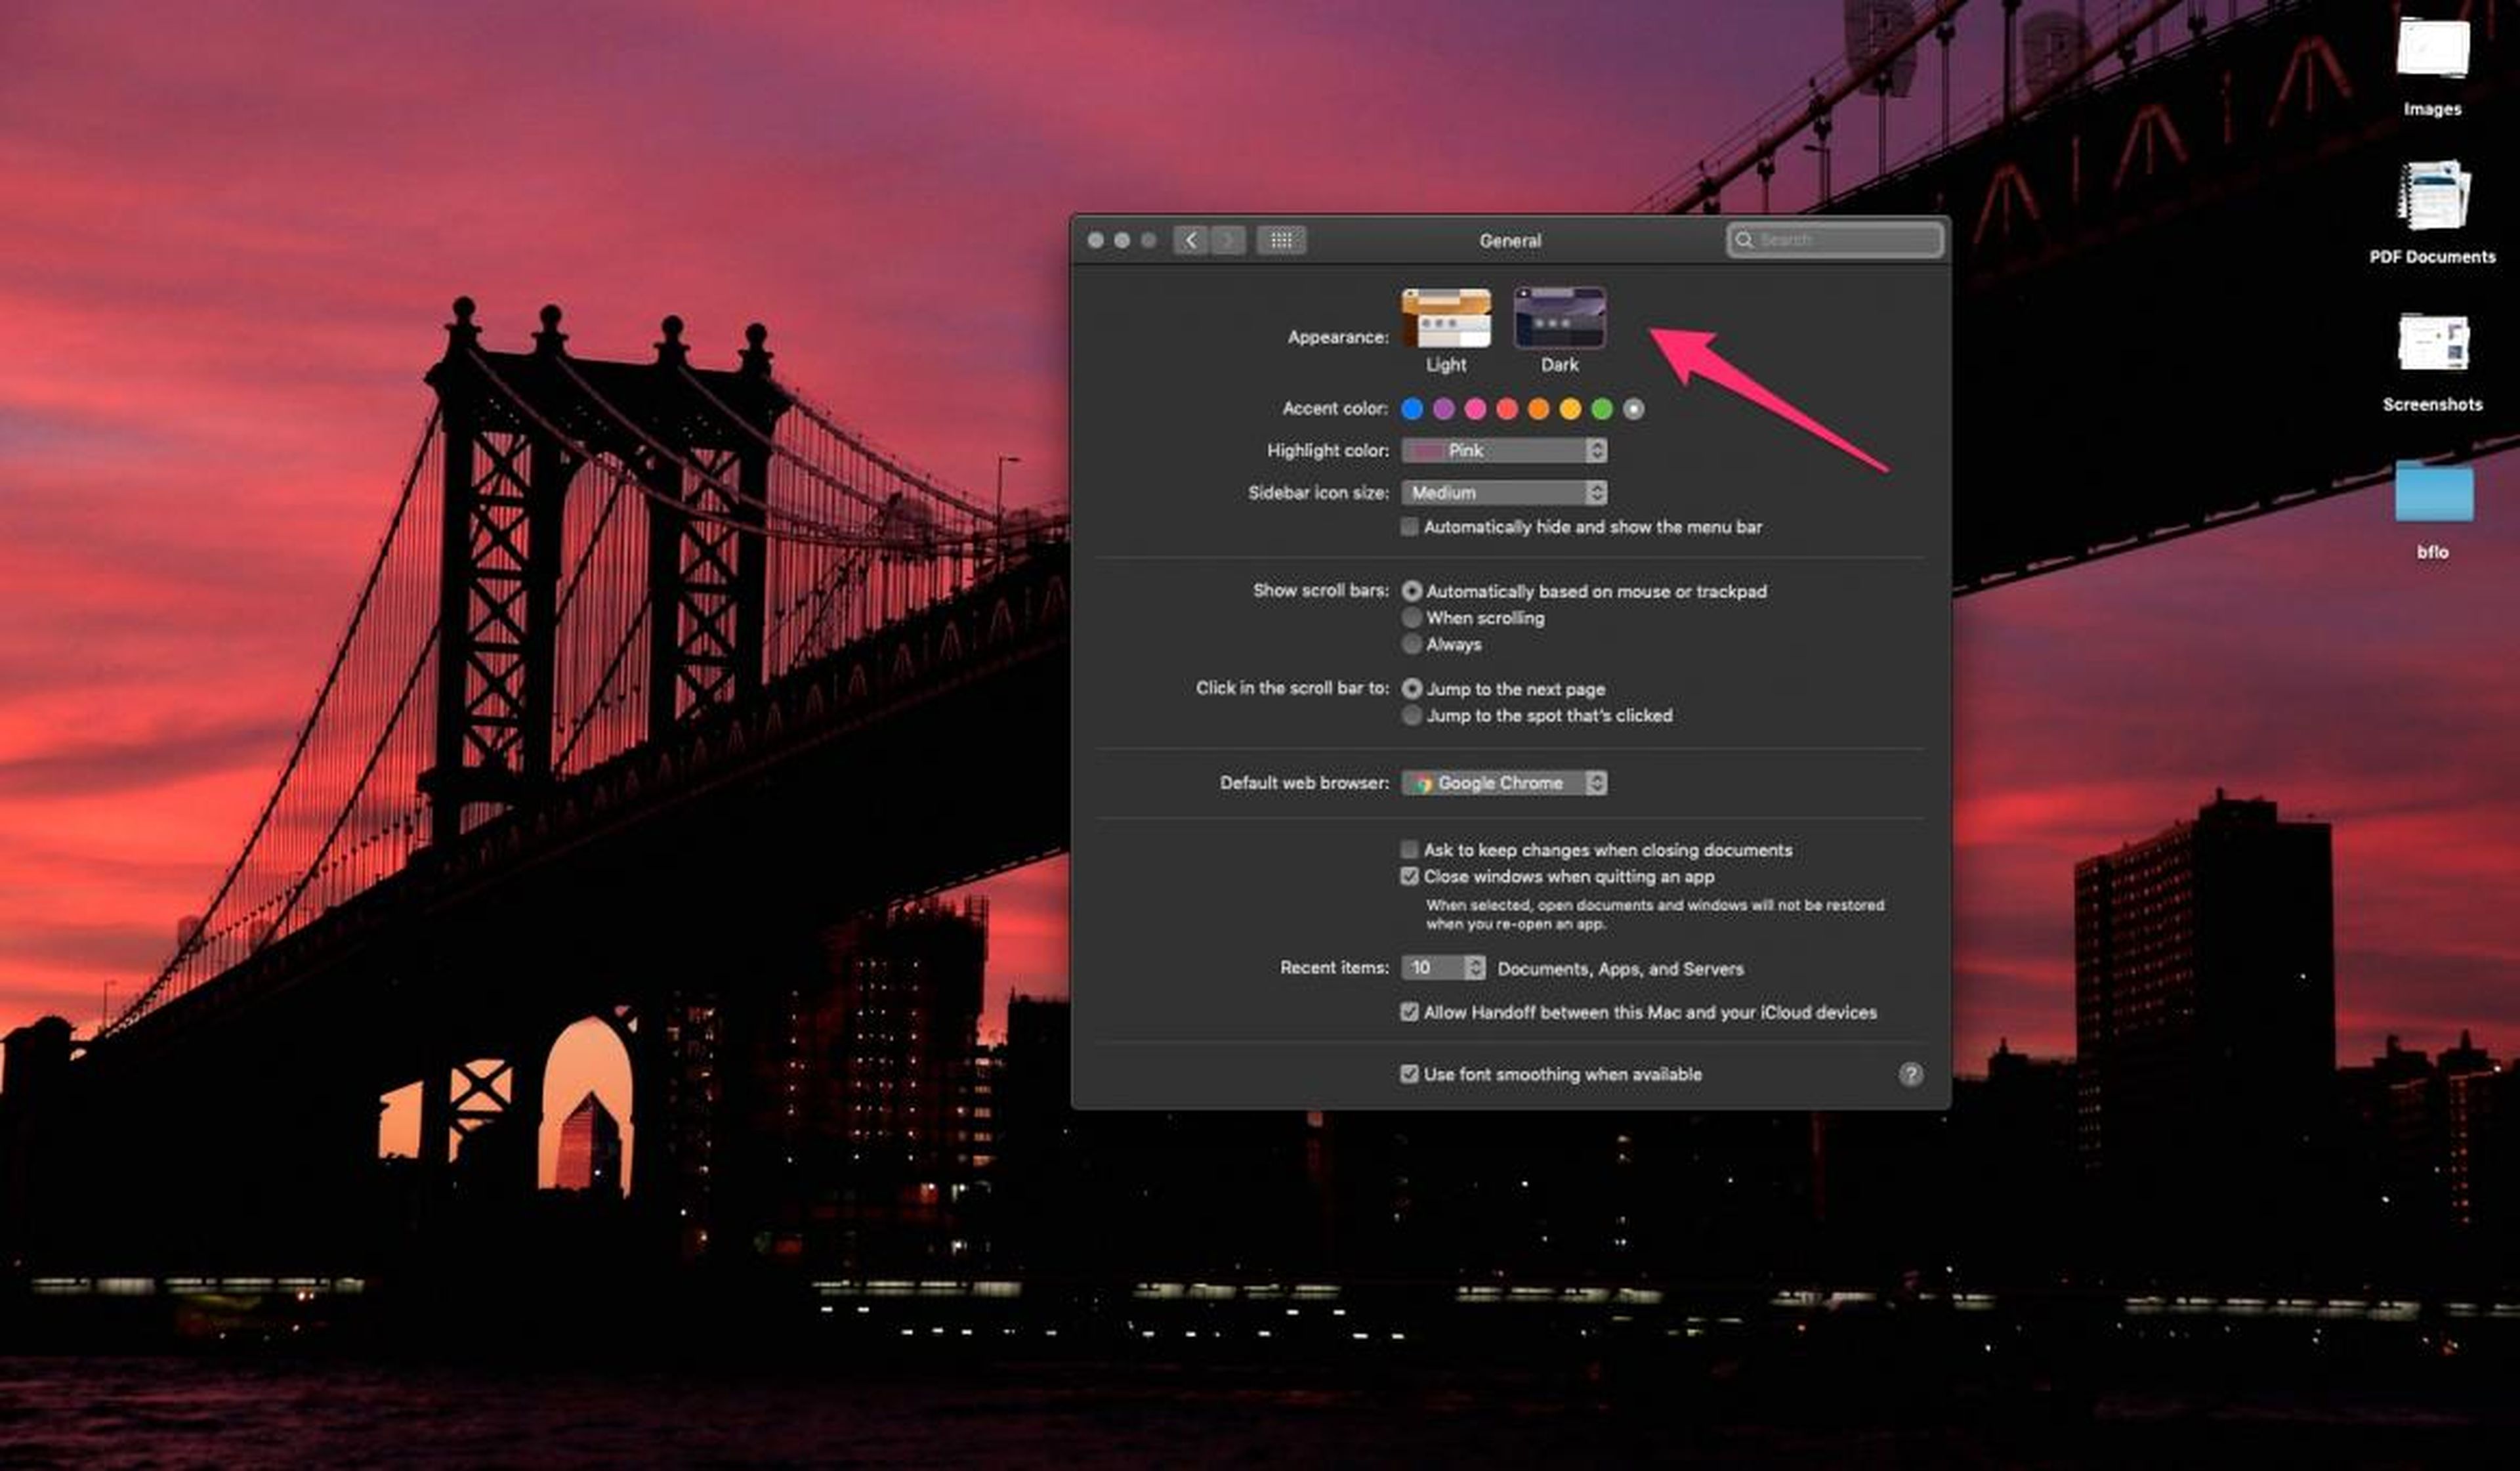 24. Thanks to the latest Mac OS software update, you can now switch your Mac to "dark mode," which turns the menu bar, finder window, and much more to a dark gray color.